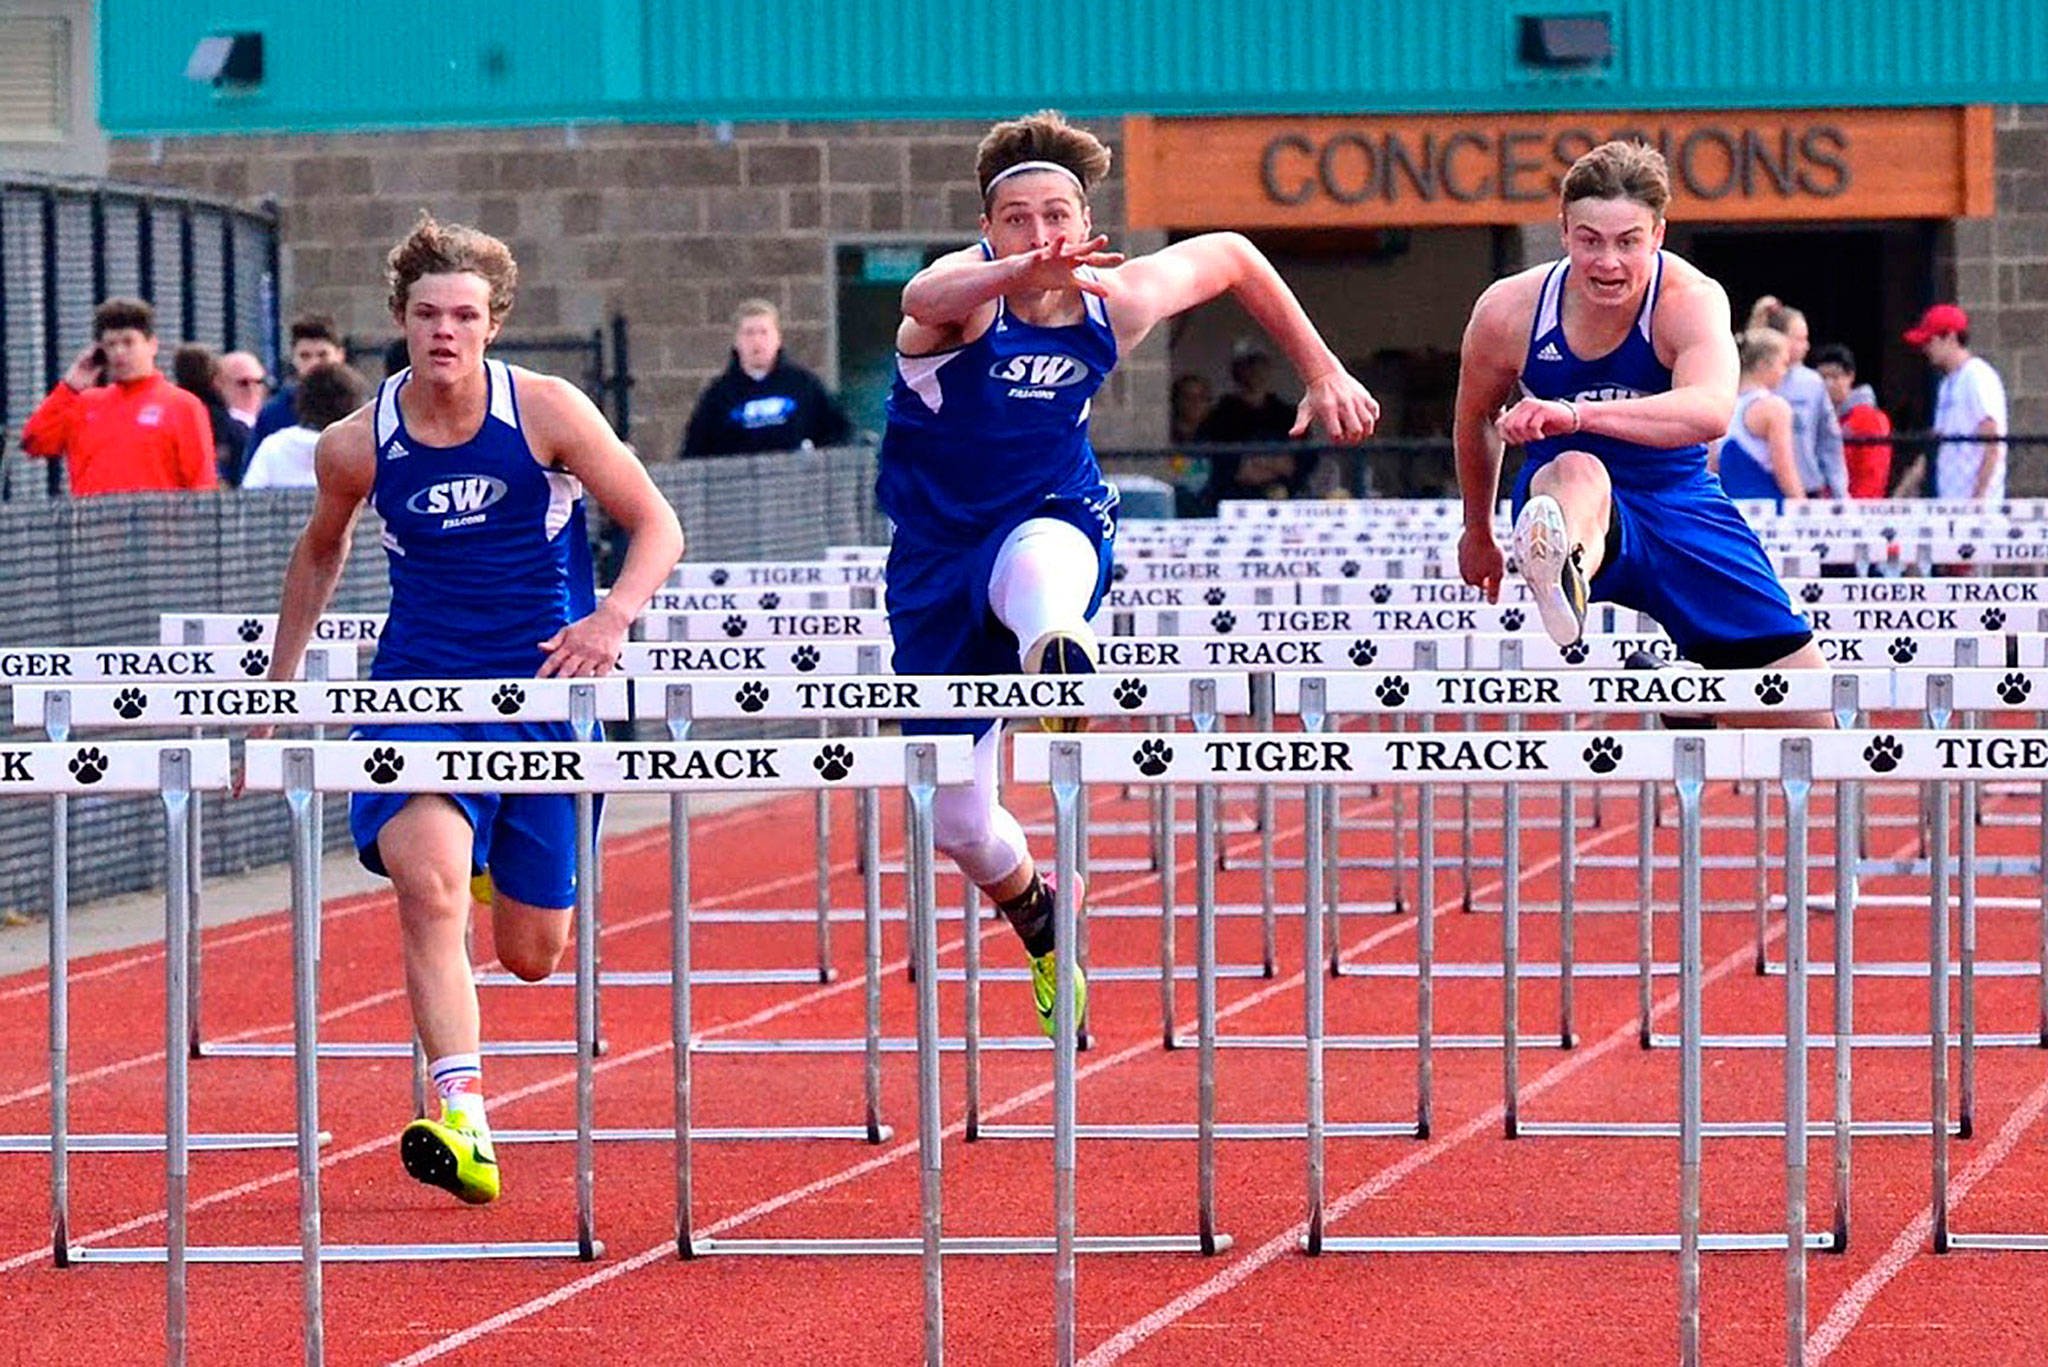 Cody Eager, left, Kole Nelson and Bodie Hezel run the 110 hurdles in the league meet in 2019. Hezel finished first, Nelson second and Eager fourth. (File photo)